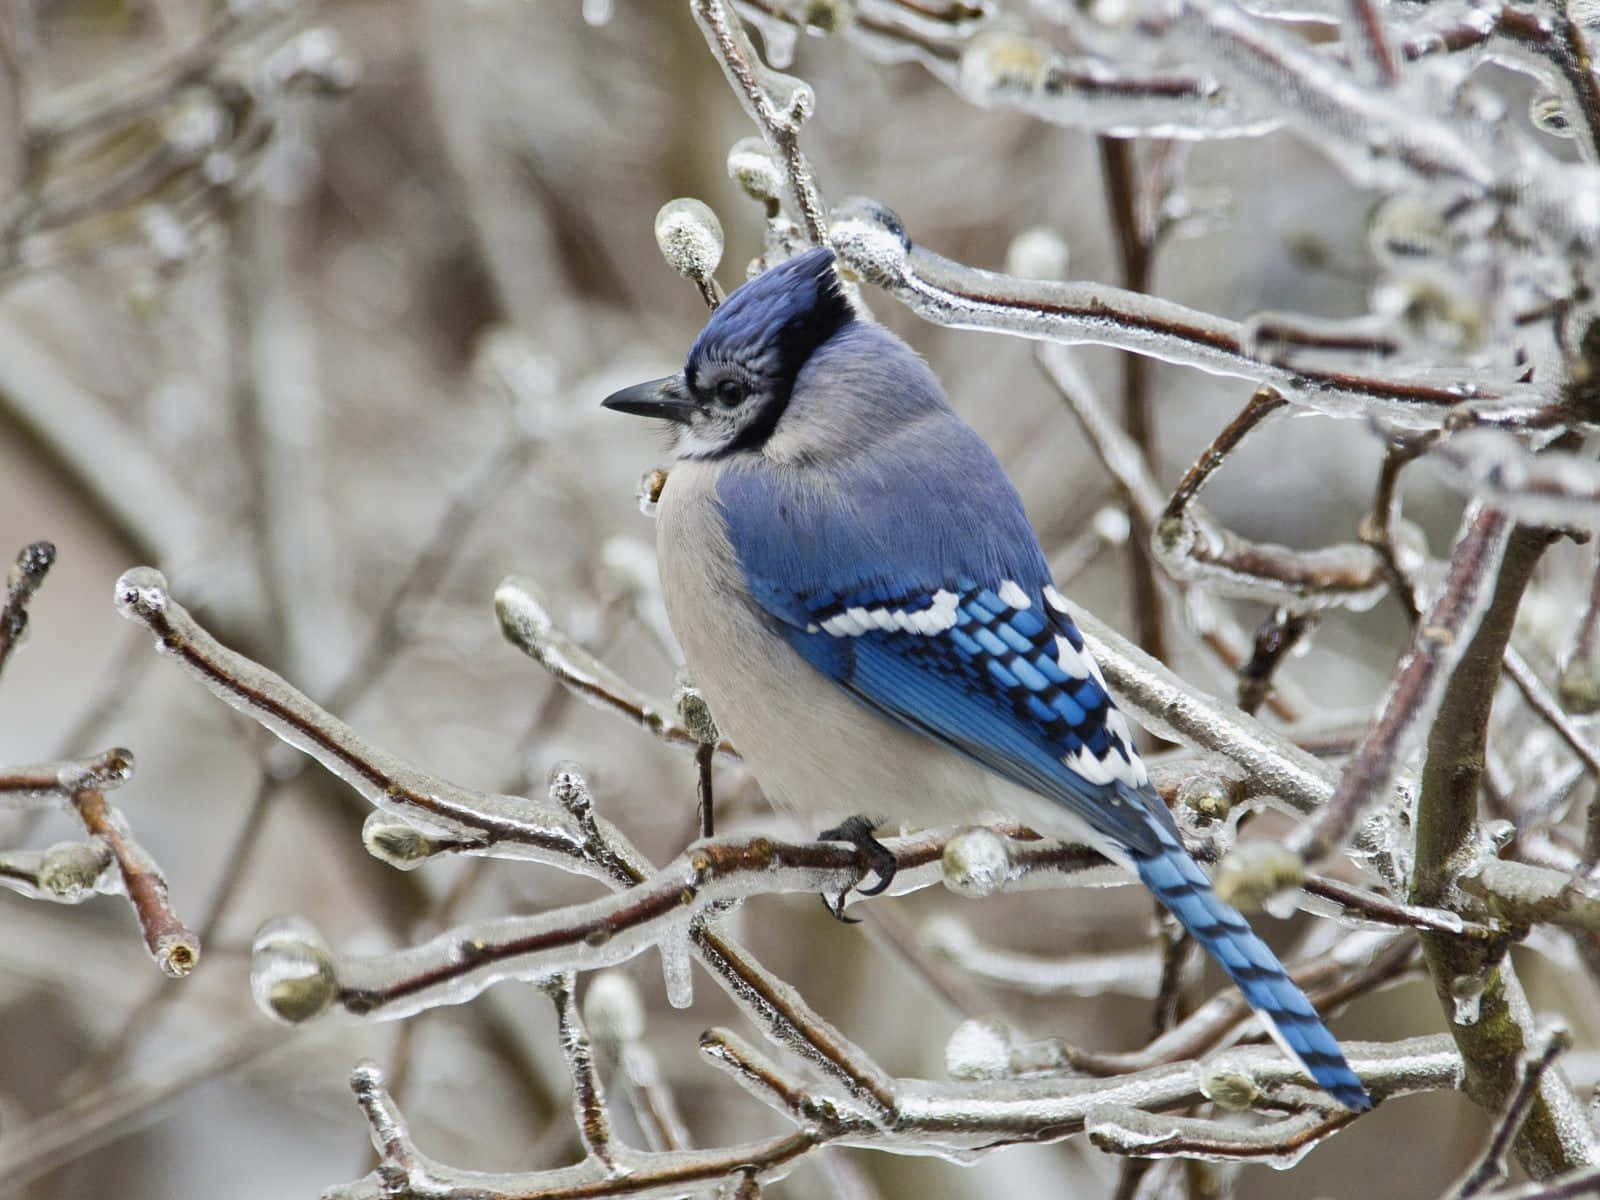 A vibrant Blue Jay perched on a branch.